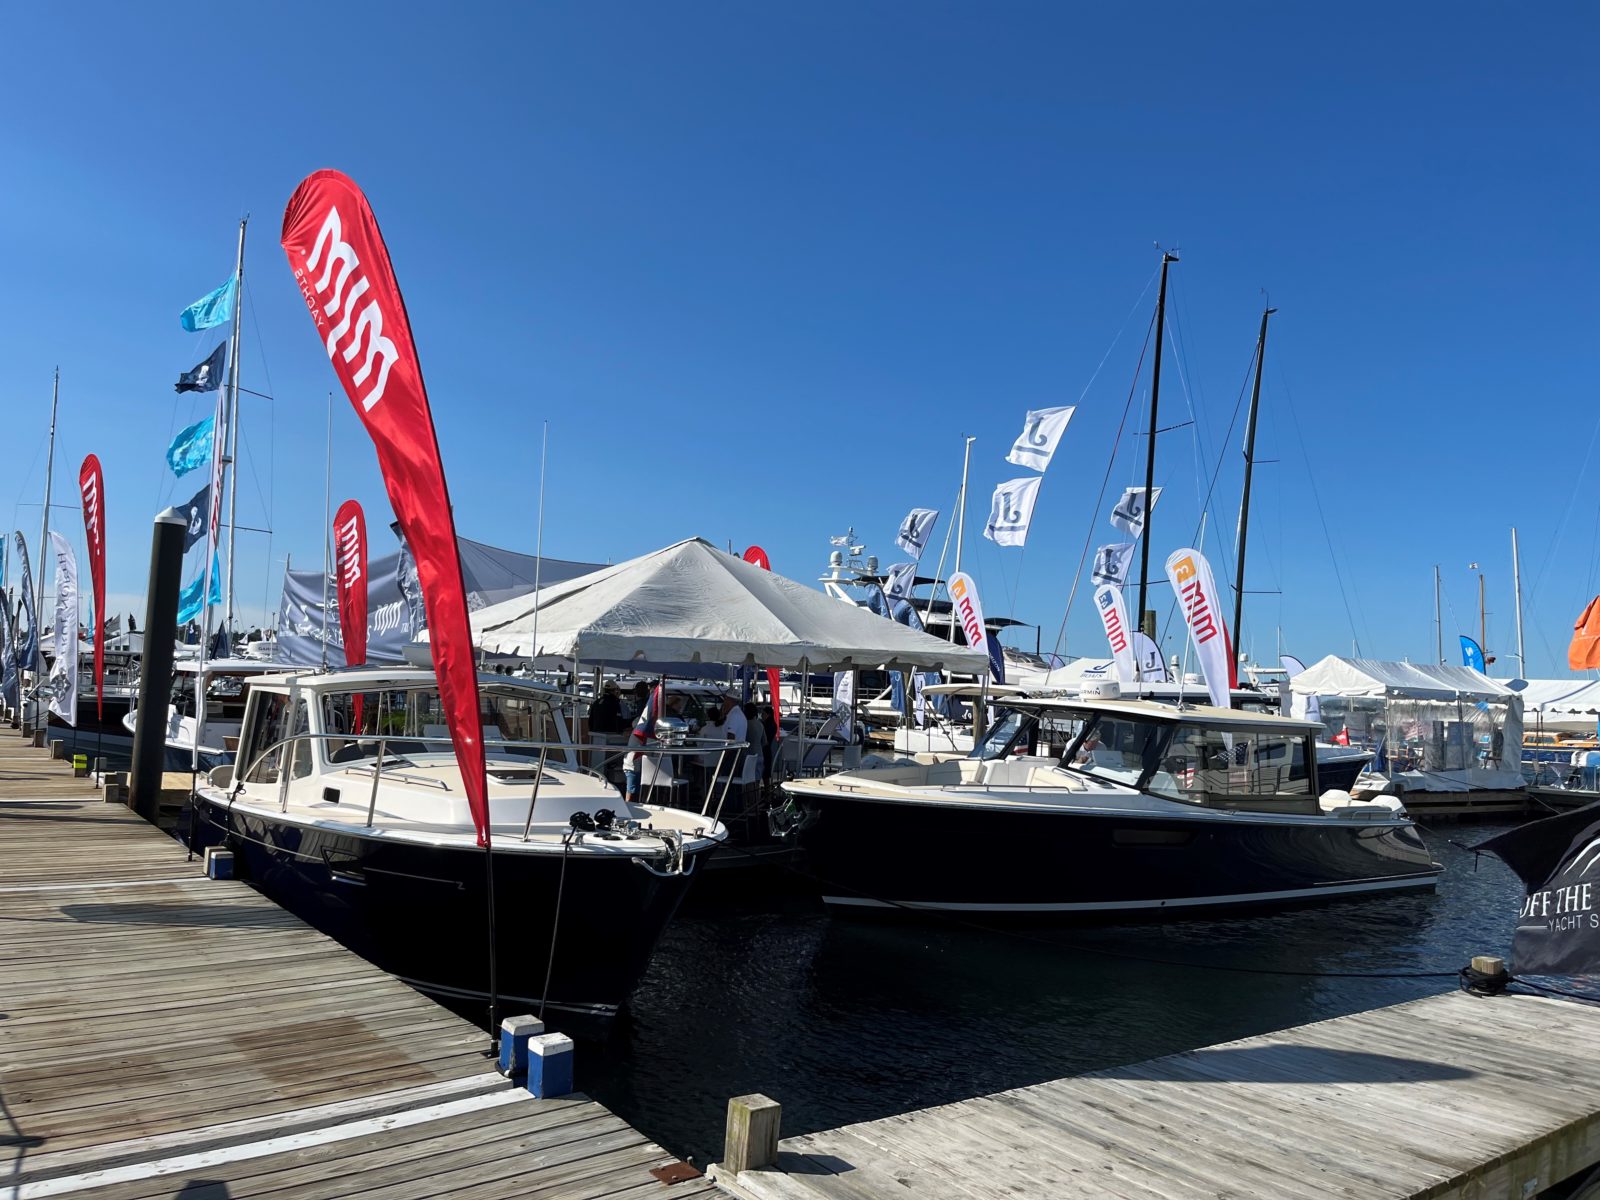 The 2022 Newport Boat Show is Open! DiMillo's Yacht Sales